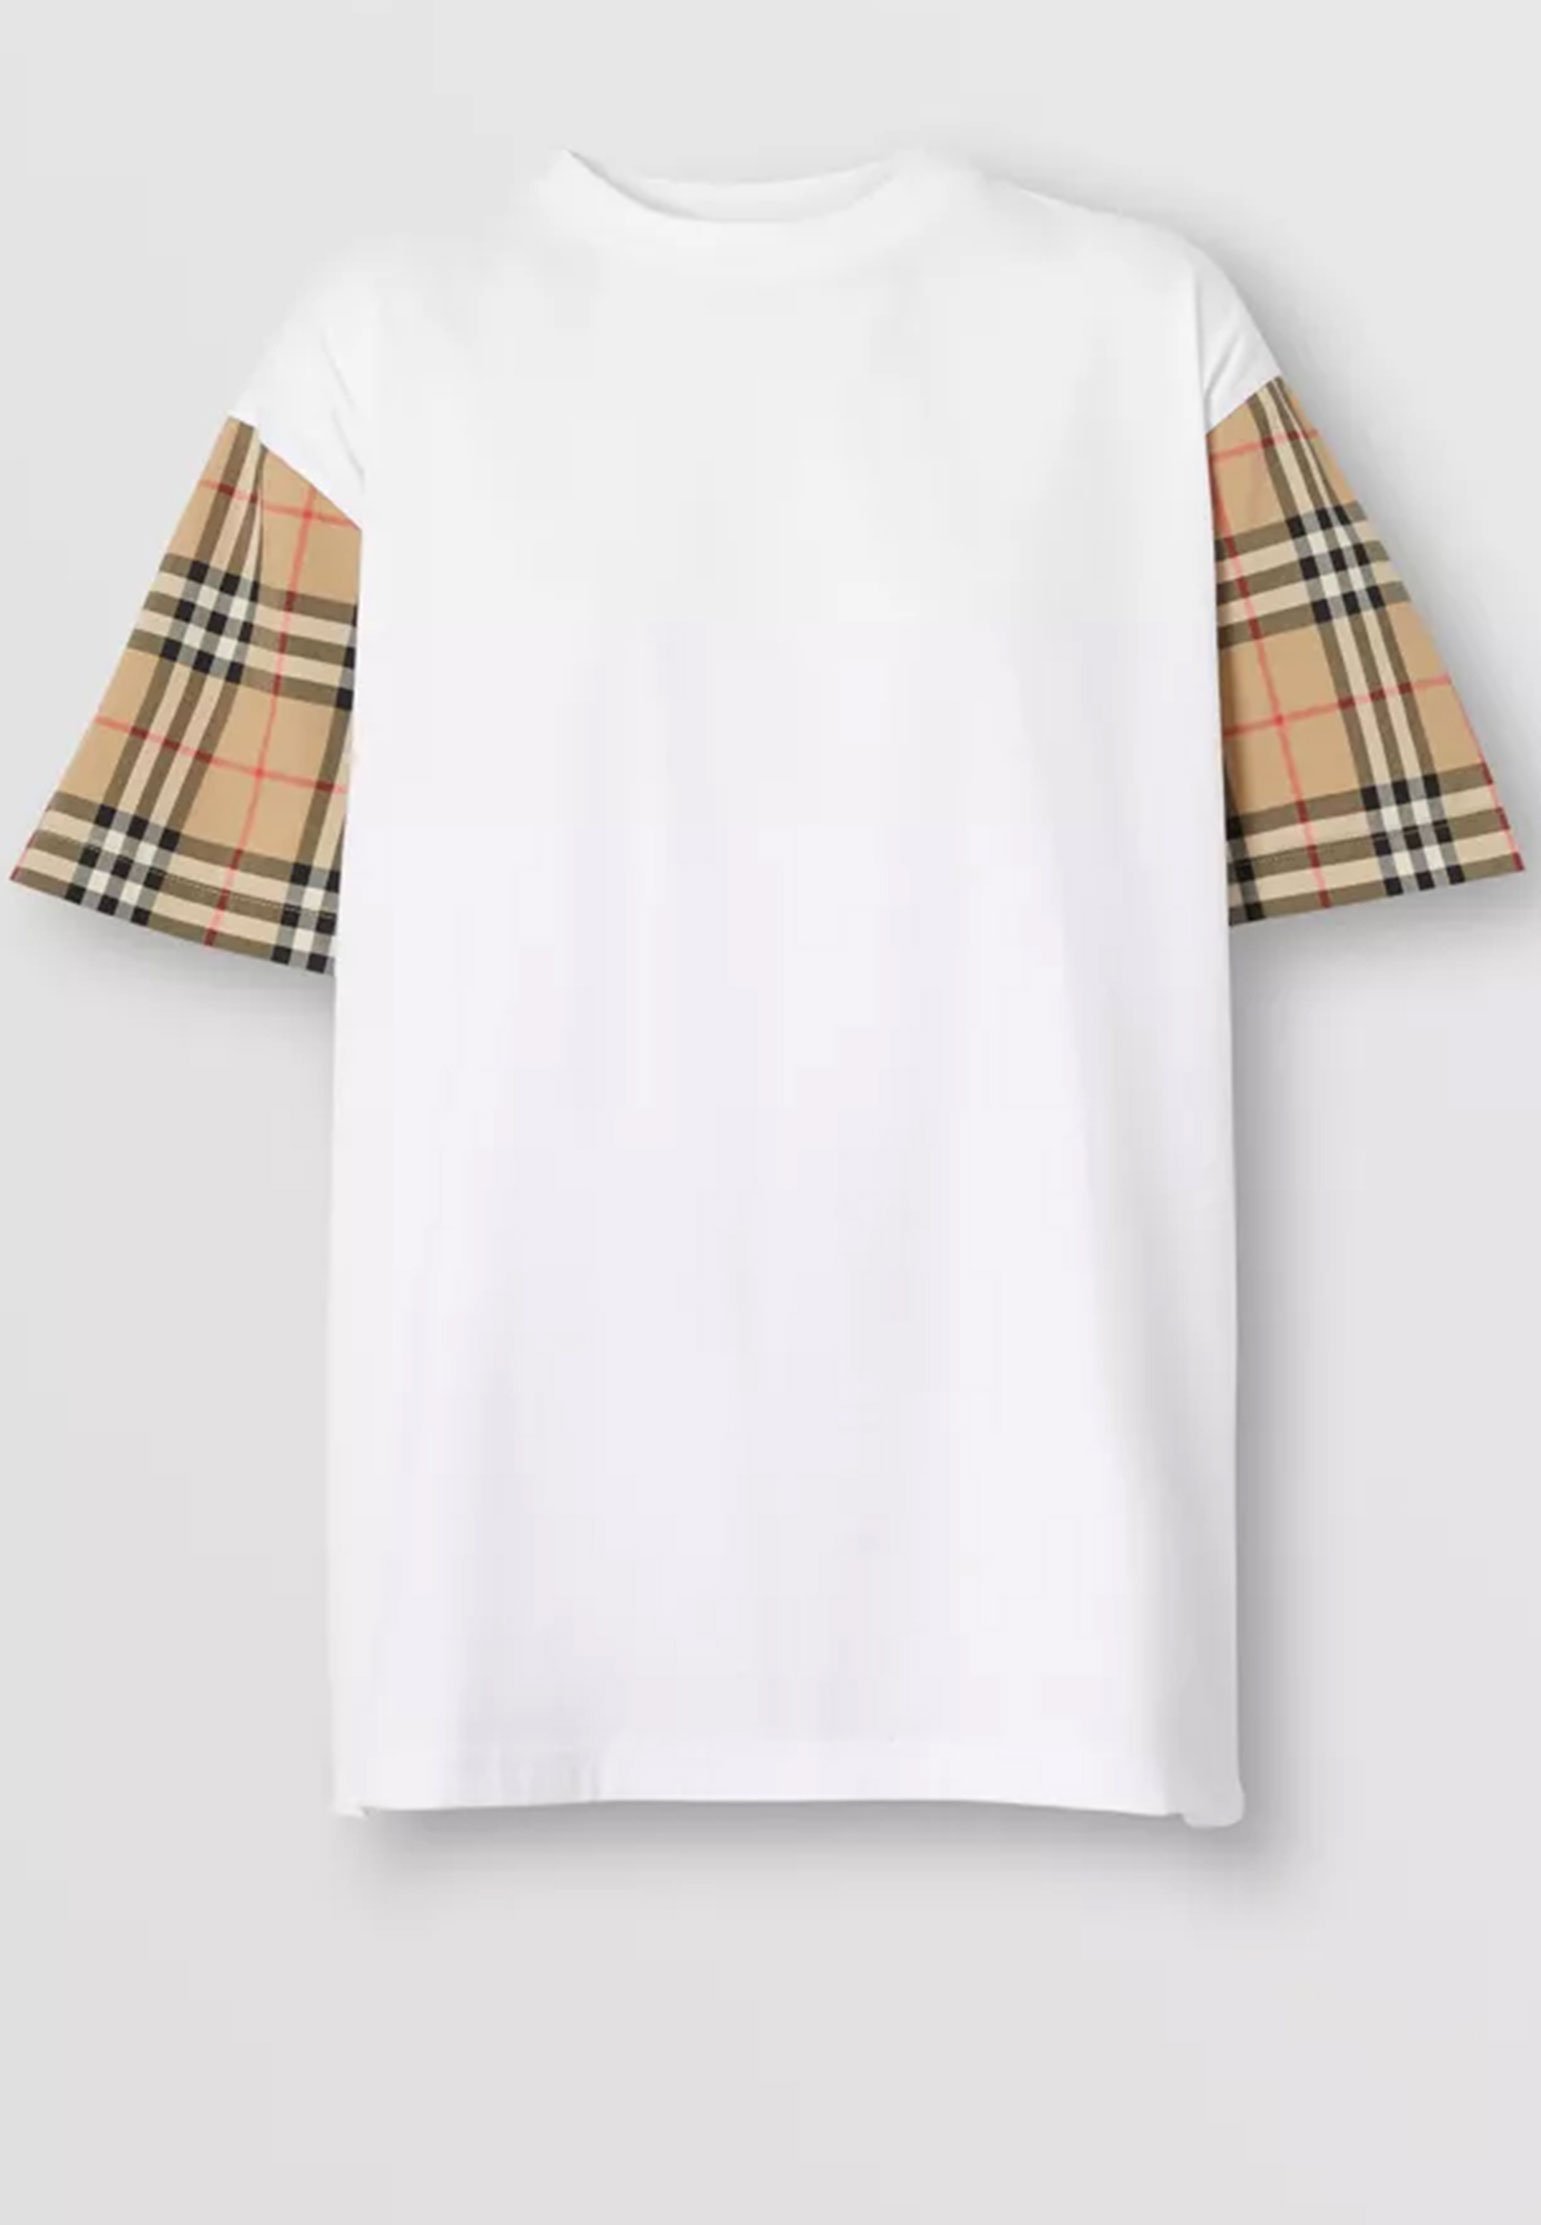 T-Shirt BURBERRY Color: white (Code: 1611) in online store Allure